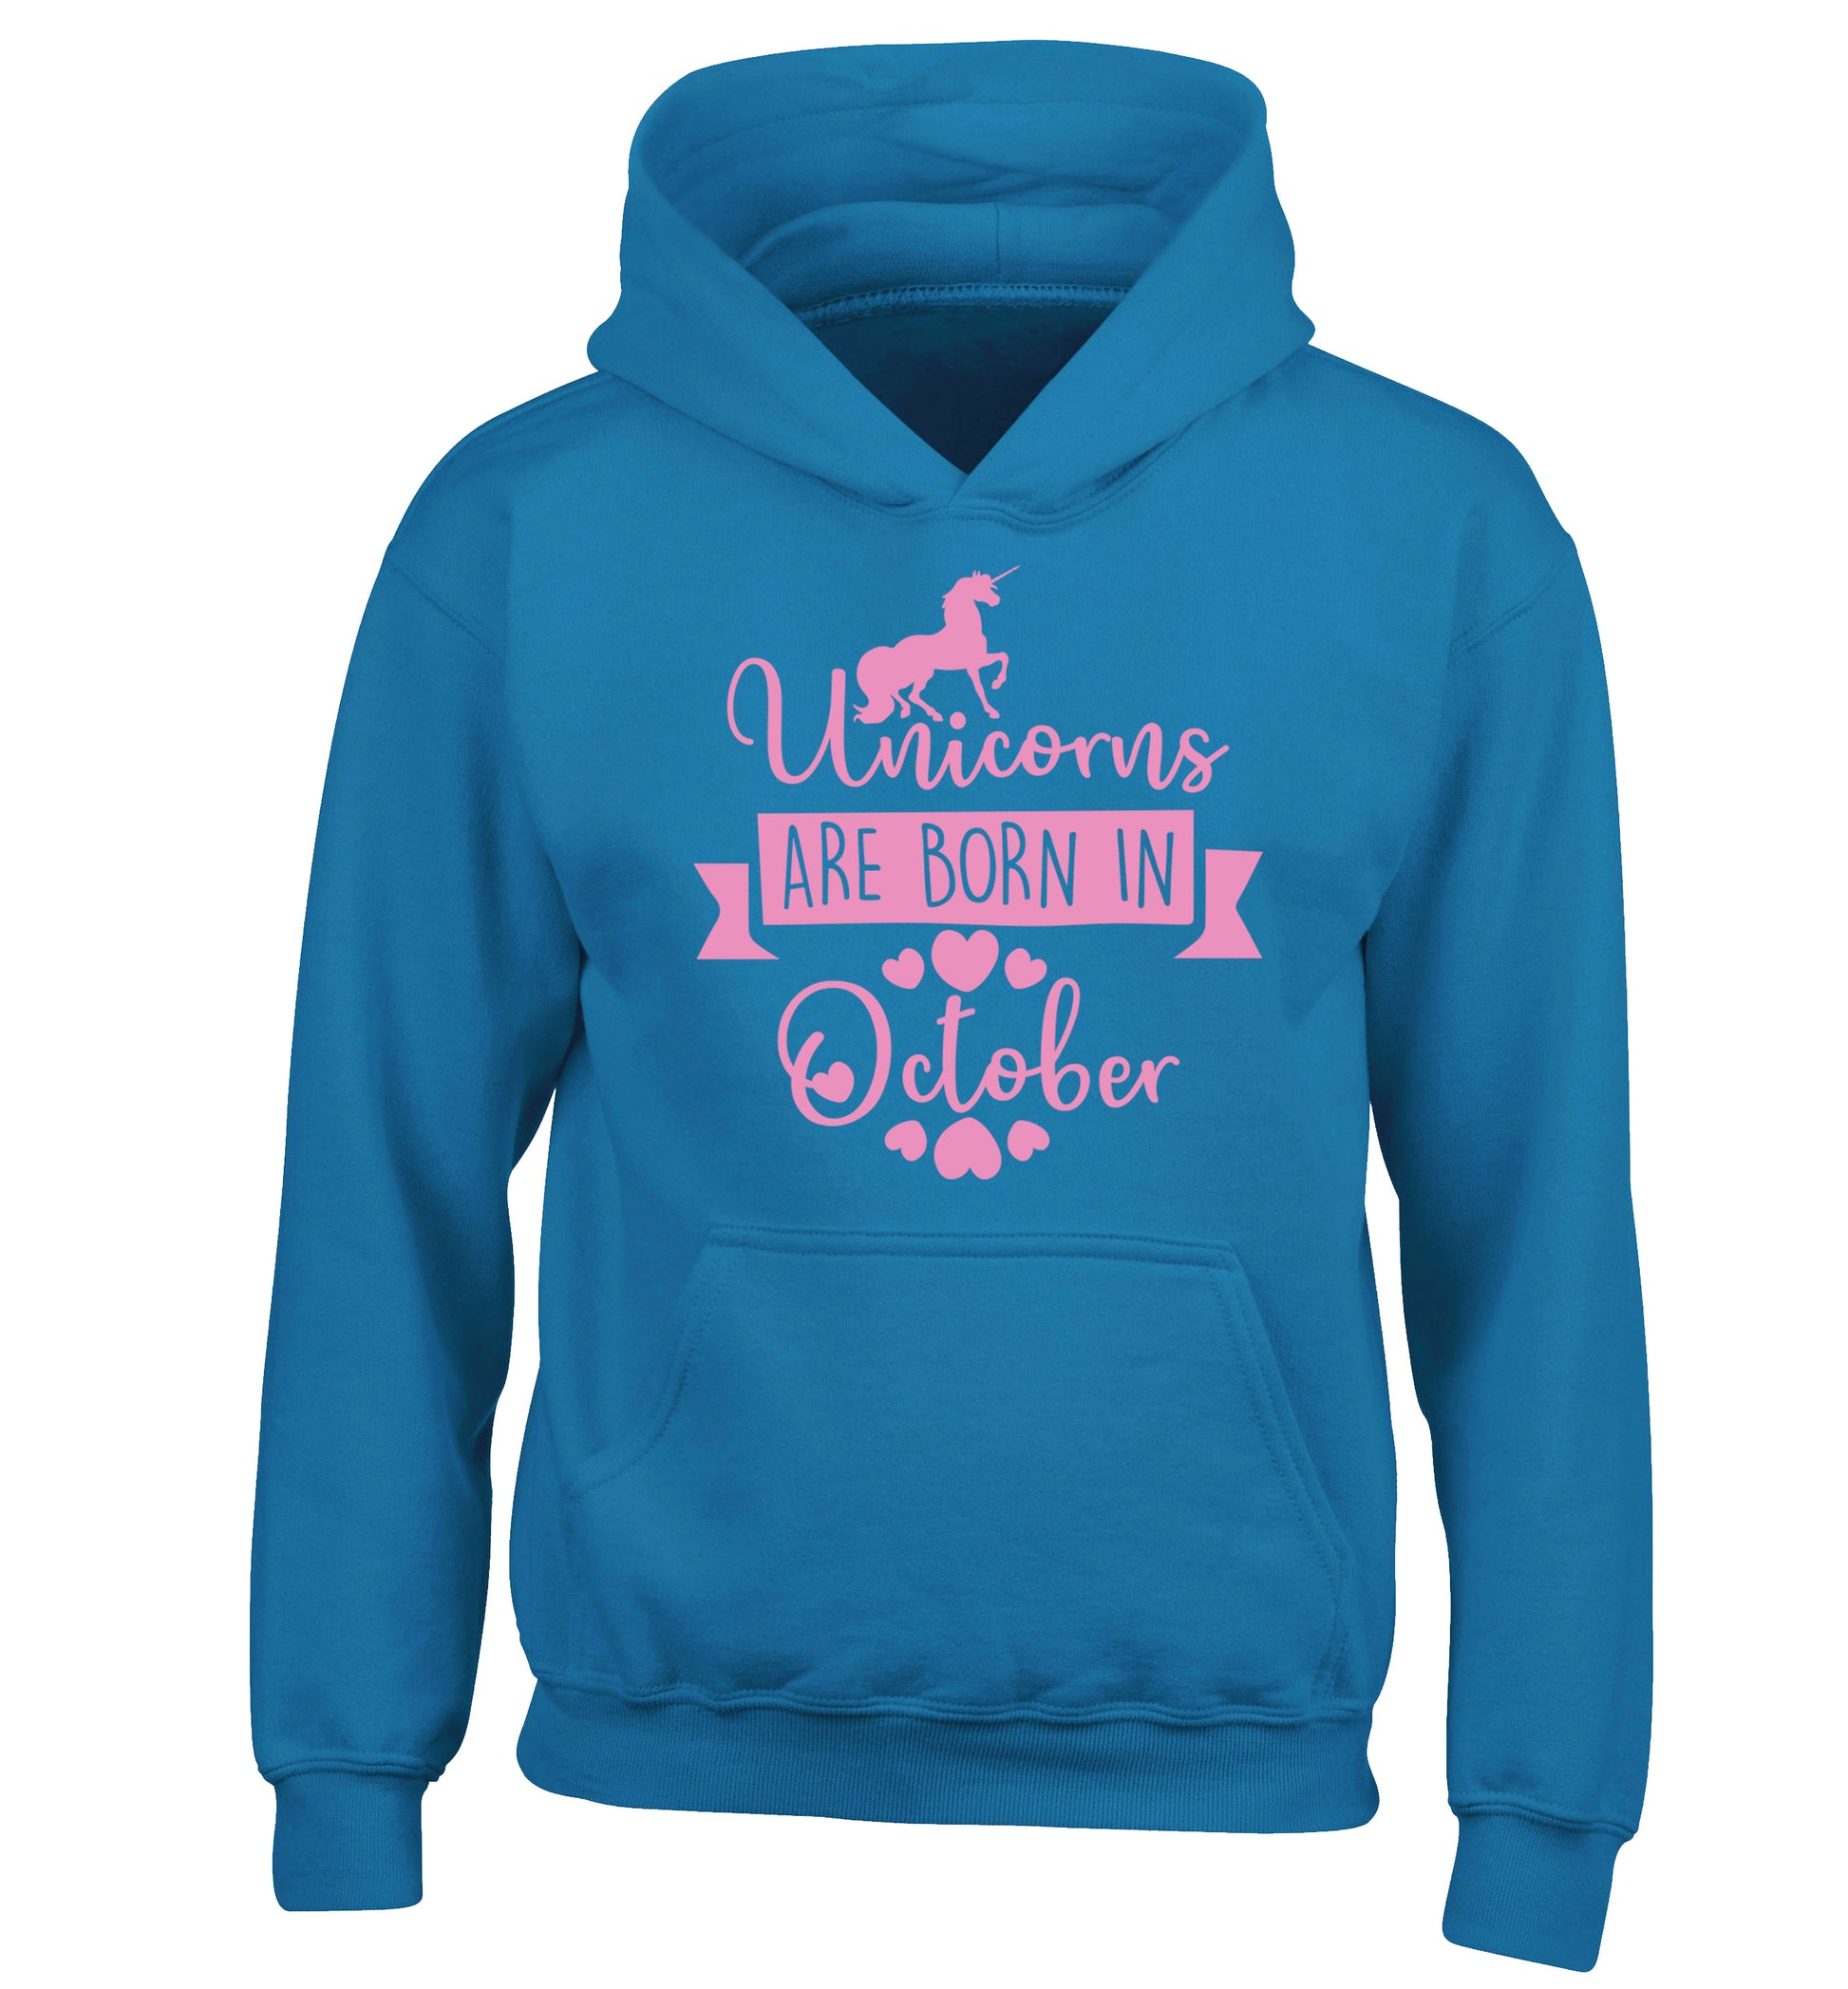 Unicorns are born in October children's blue hoodie 12-13 Years